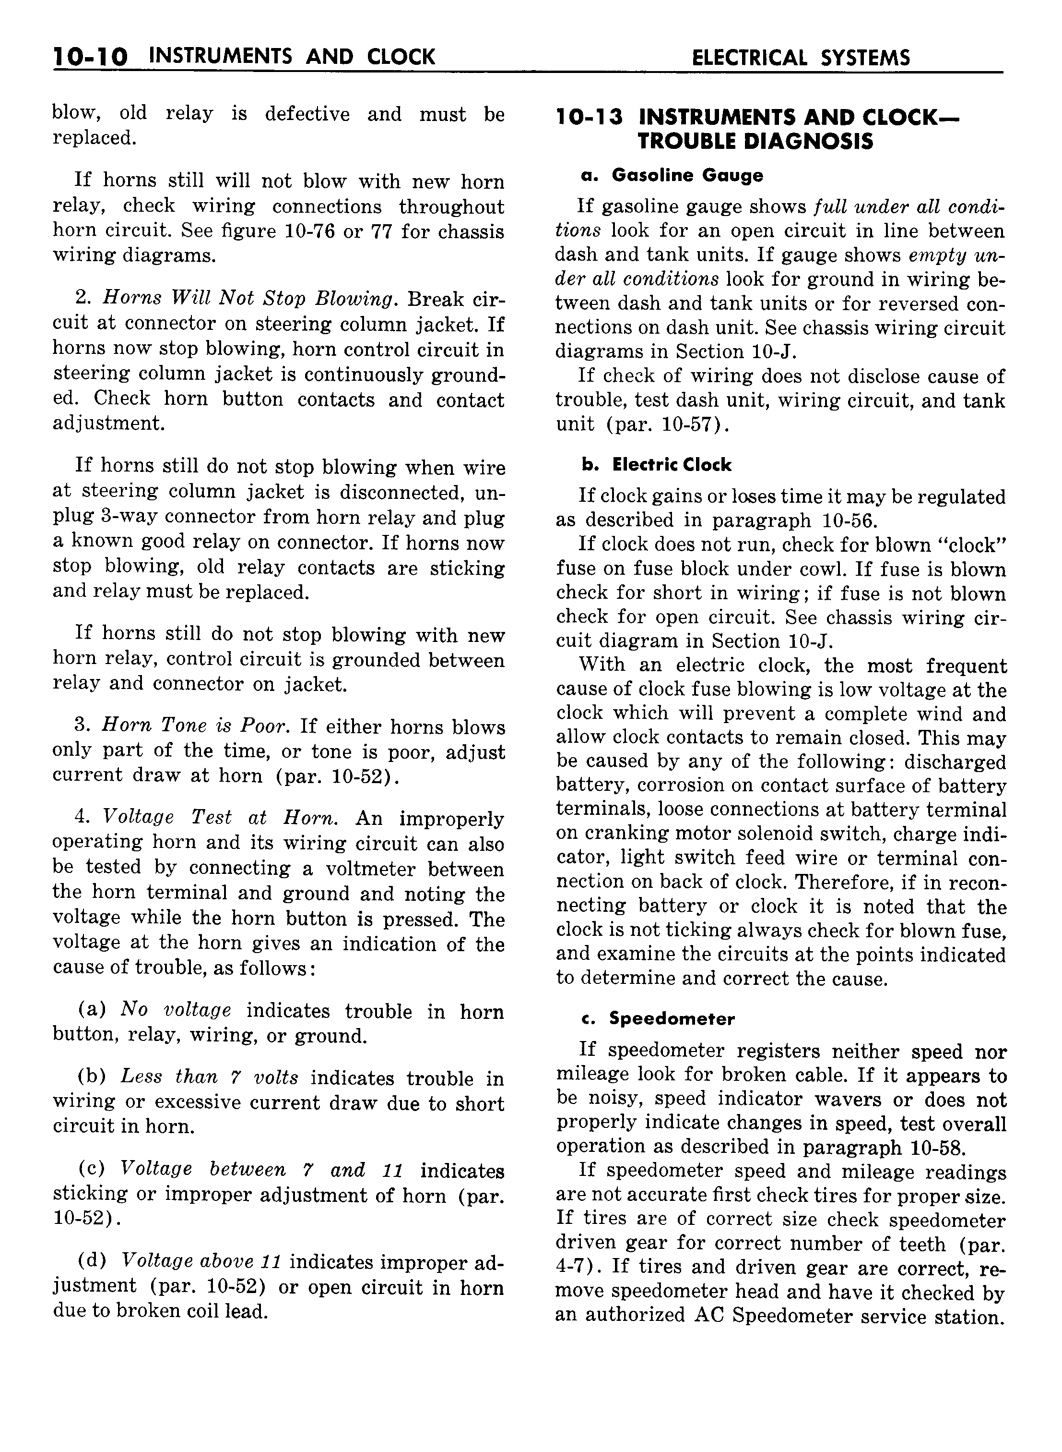 n_11 1957 Buick Shop Manual - Electrical Systems-010-010.jpg